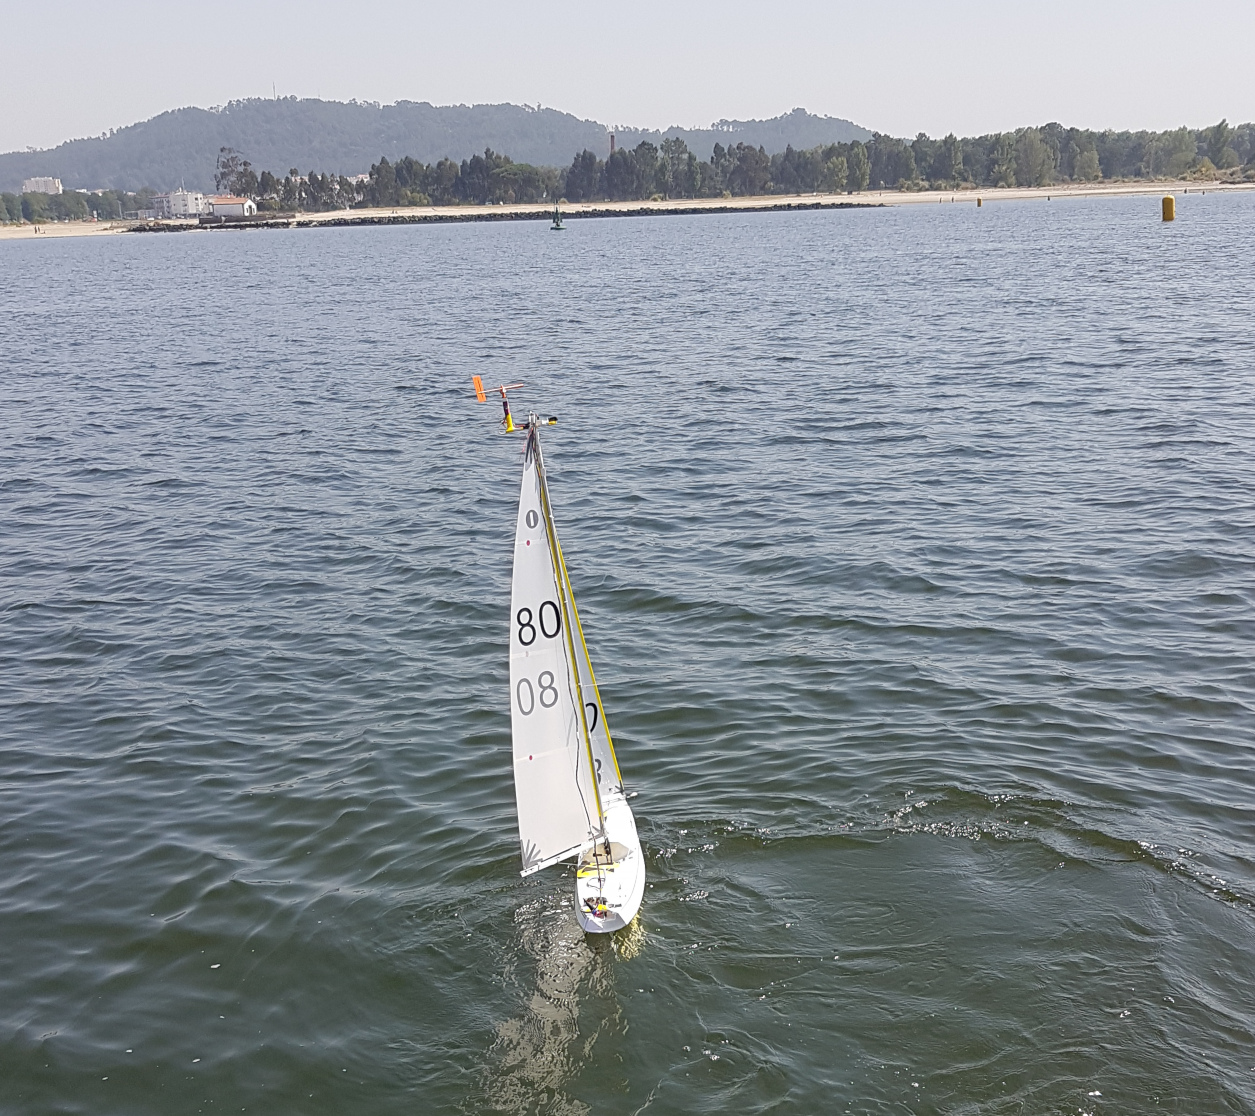 A small sailing boat in the water